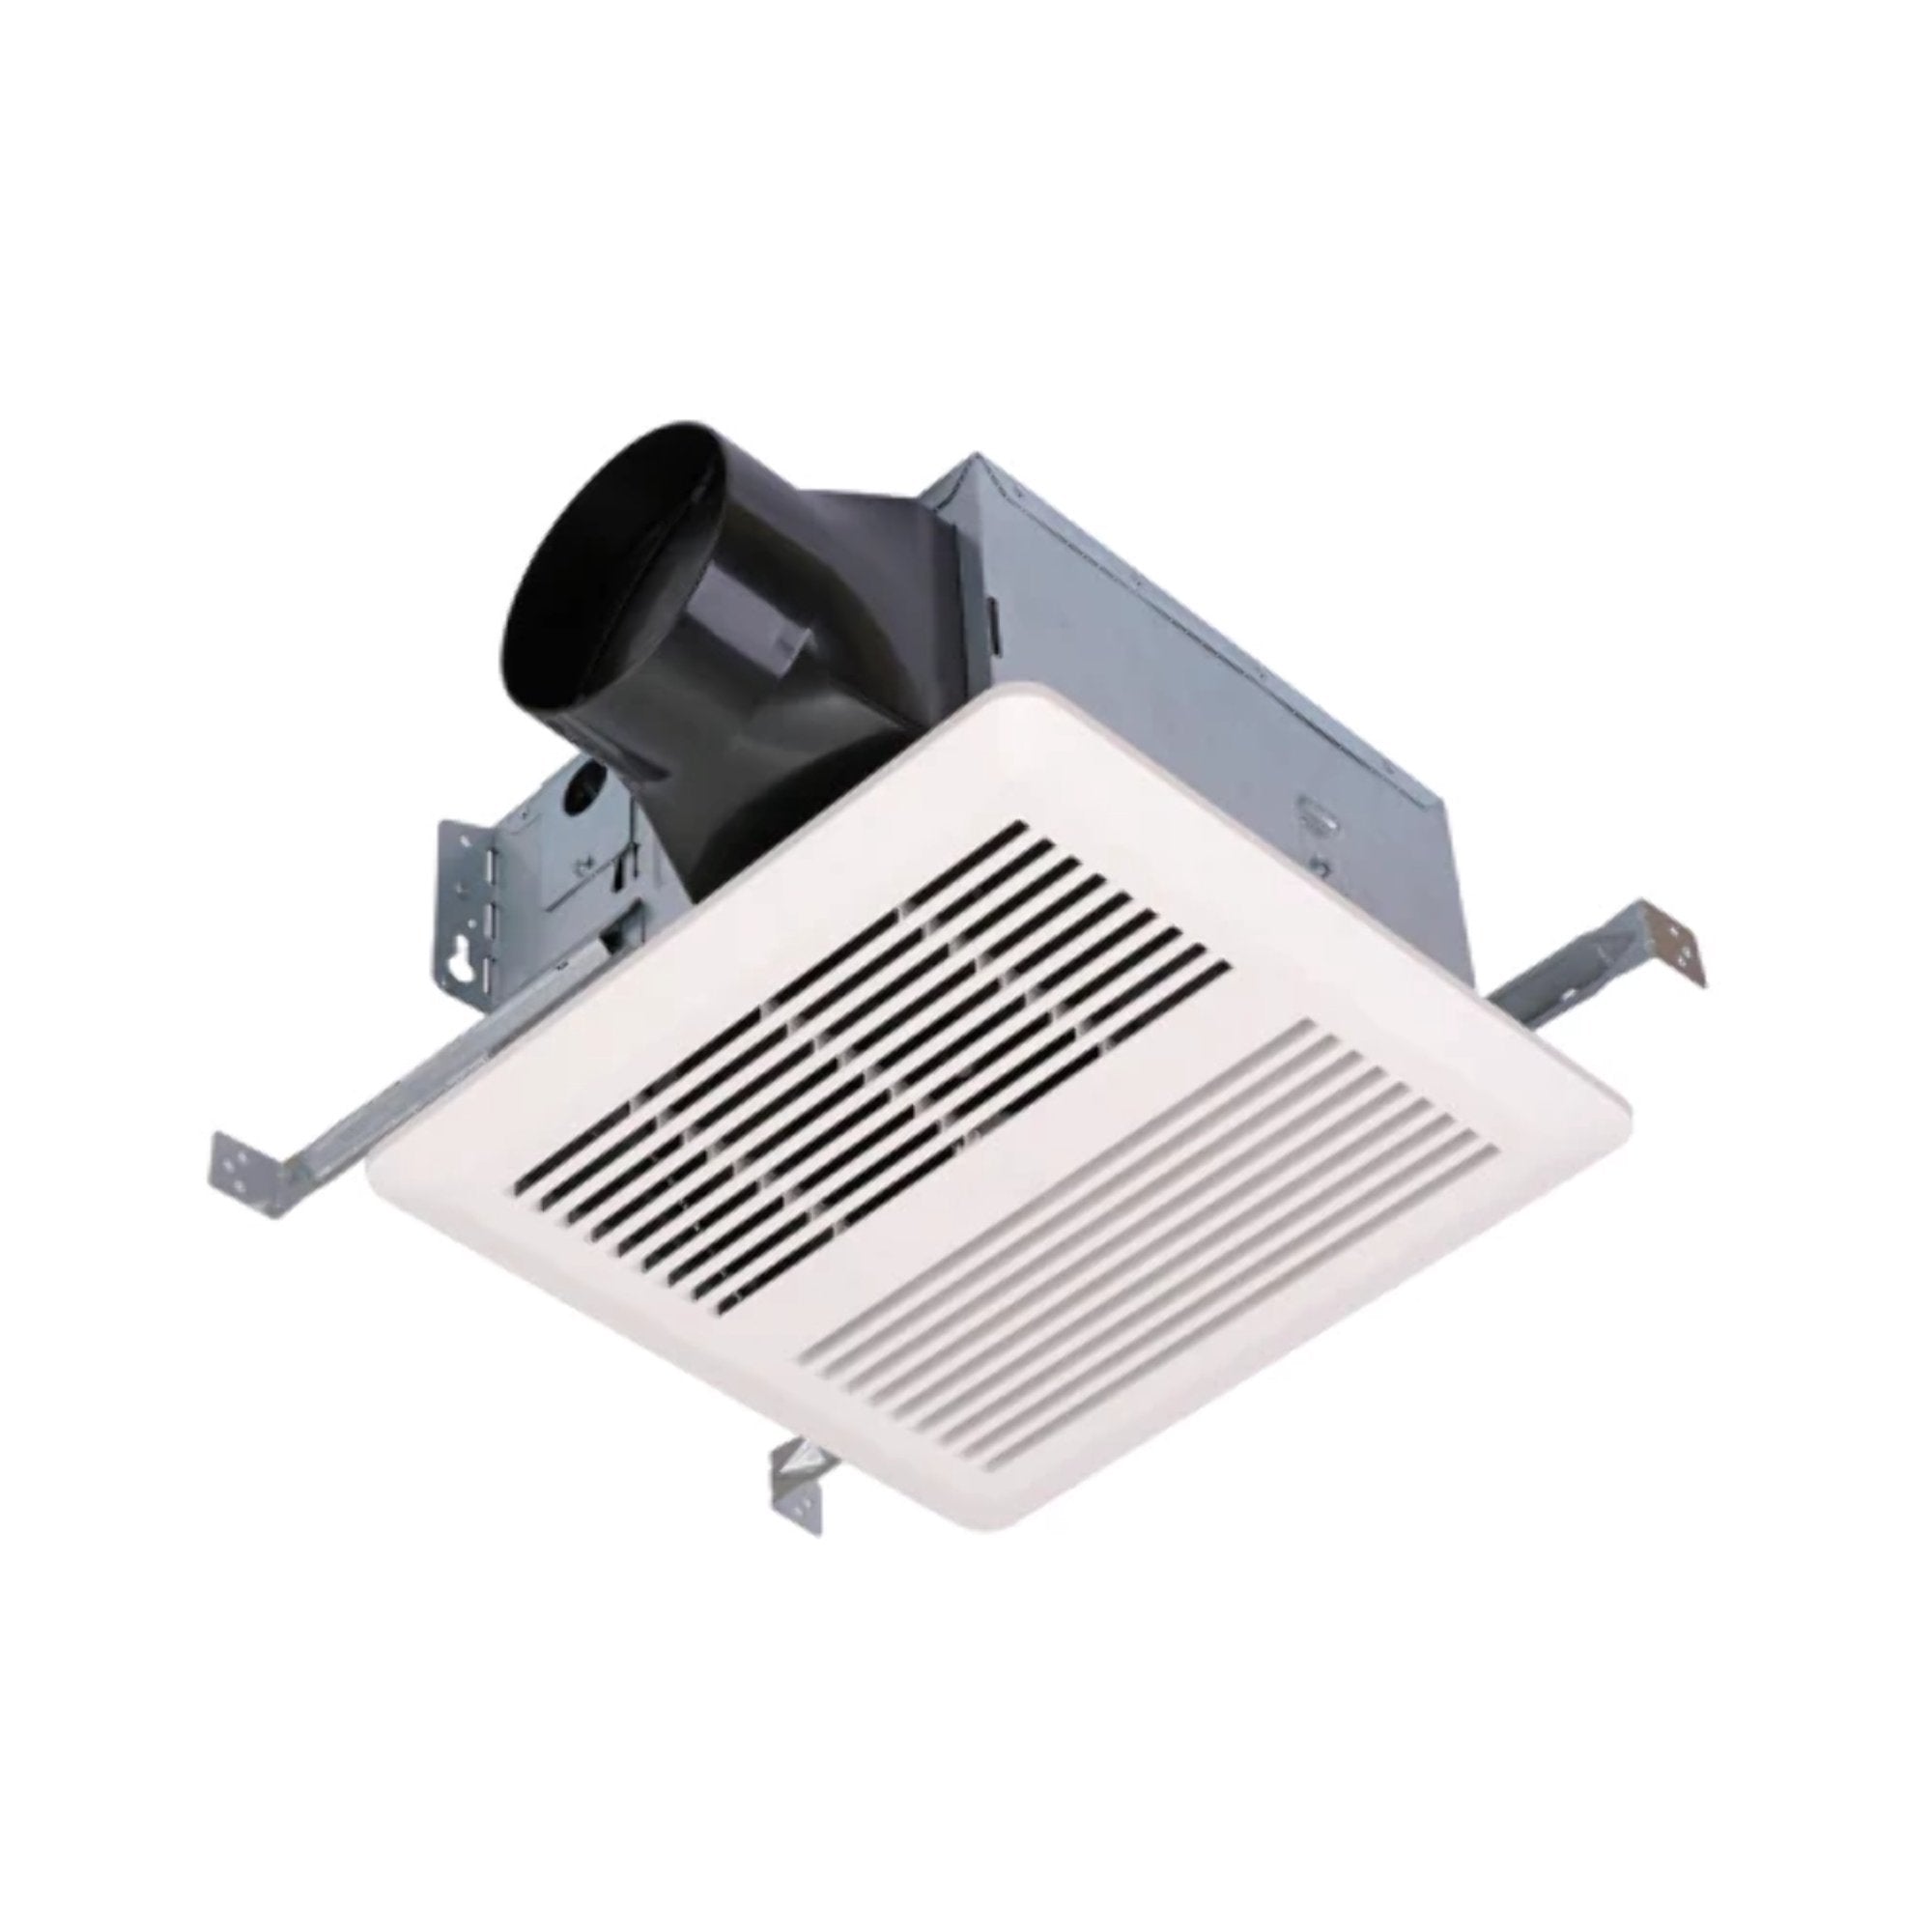 Airzone SP80H Shallow Ventilation Fan with Humidity Sensor - 80 CFM, 1.0 Sones